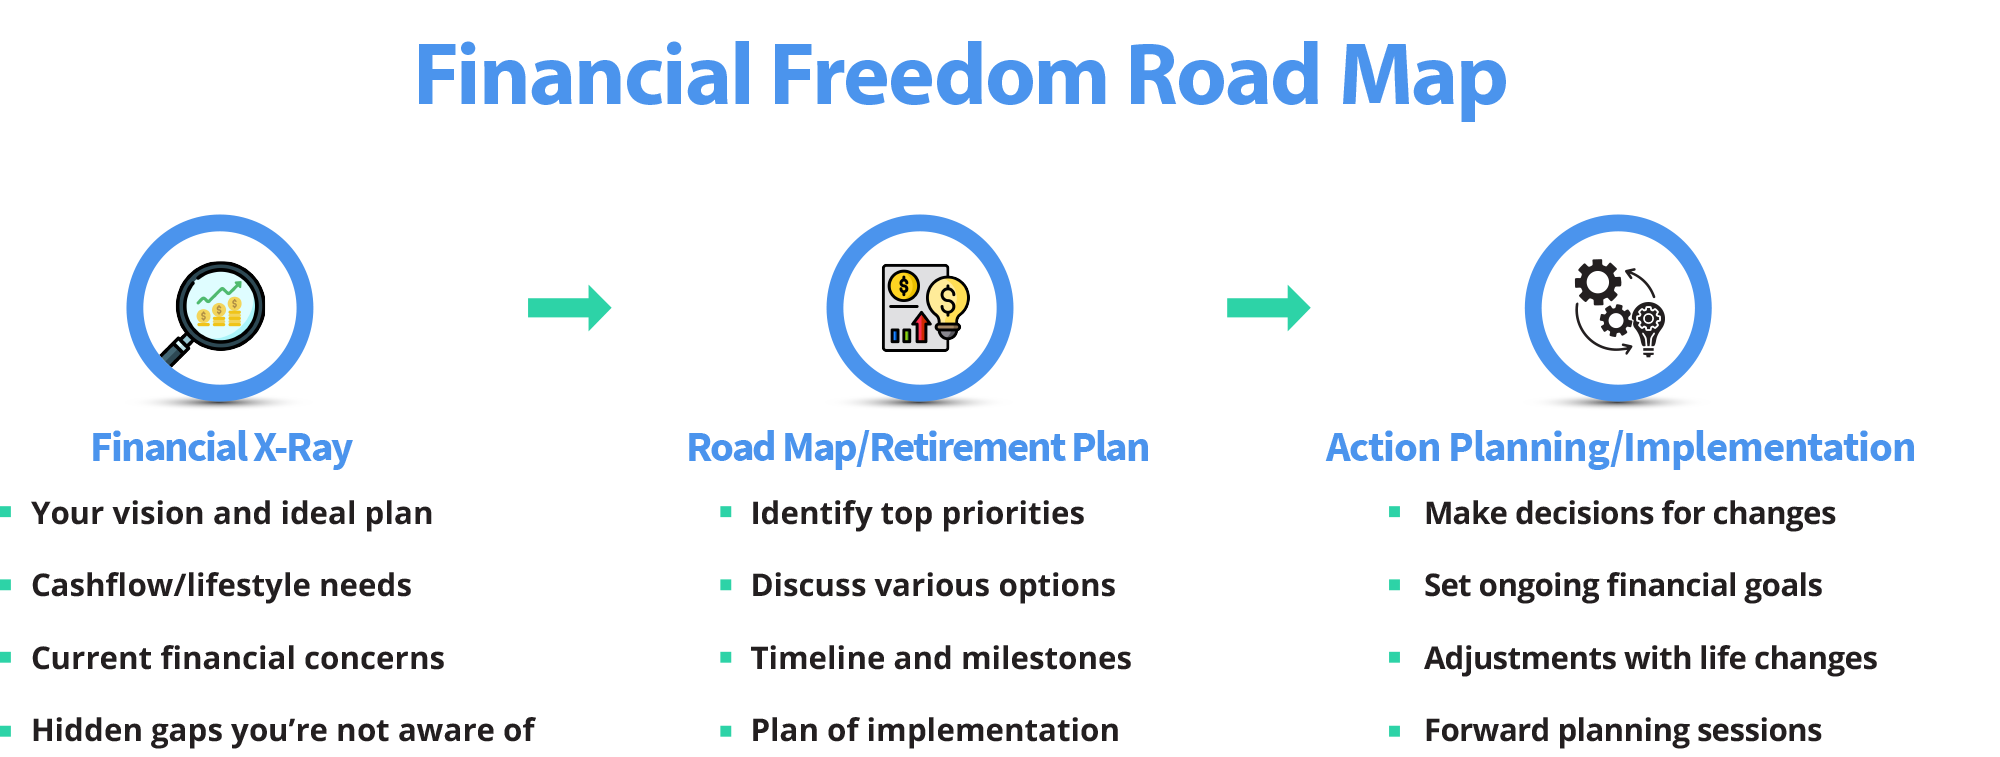 Financial Freedom Road Map